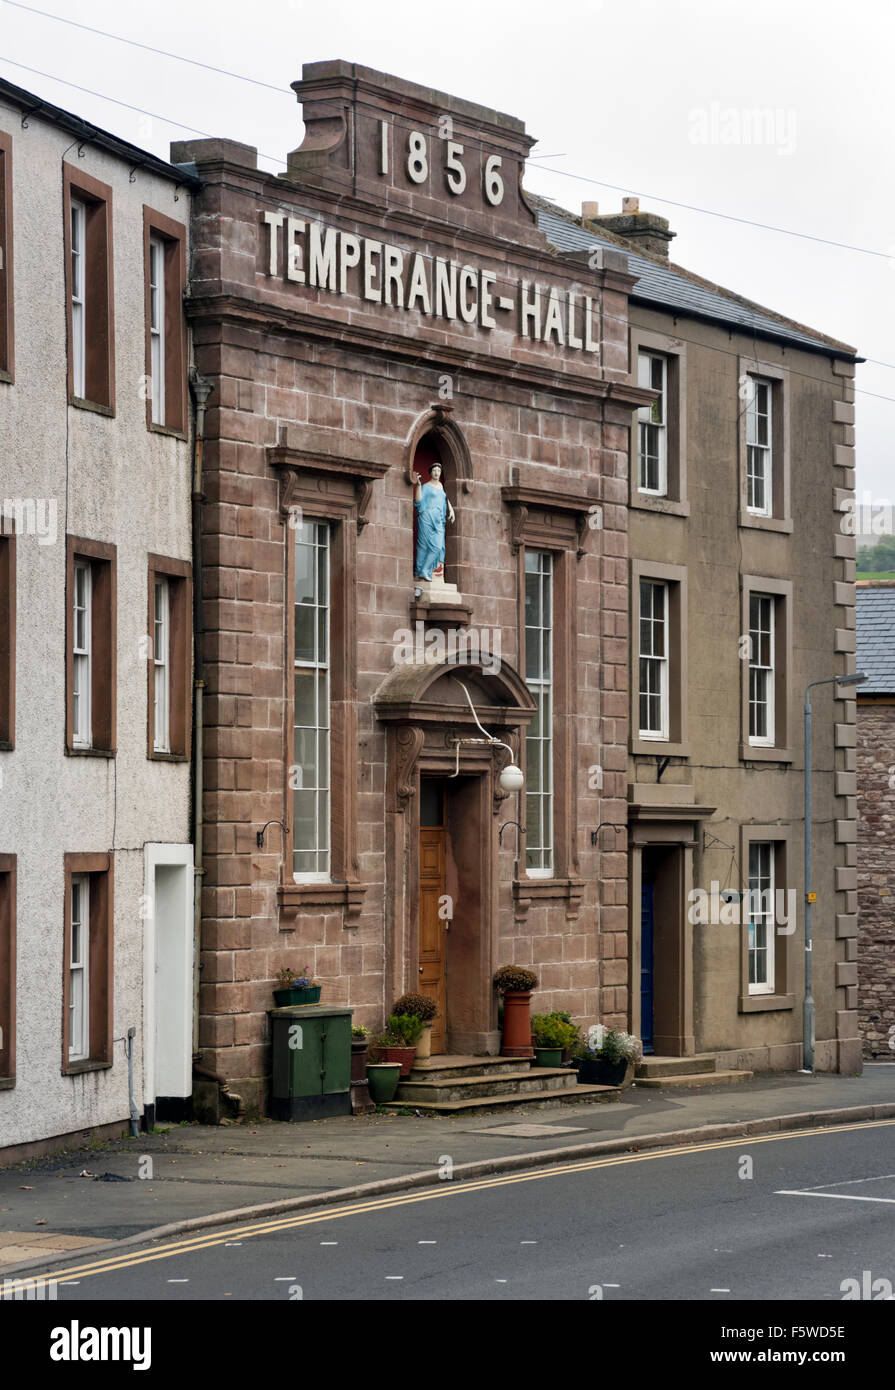 The Temperance Hall, 1856, in the market town of Kirkby Stephen, Cumbria, UK Stock Photo